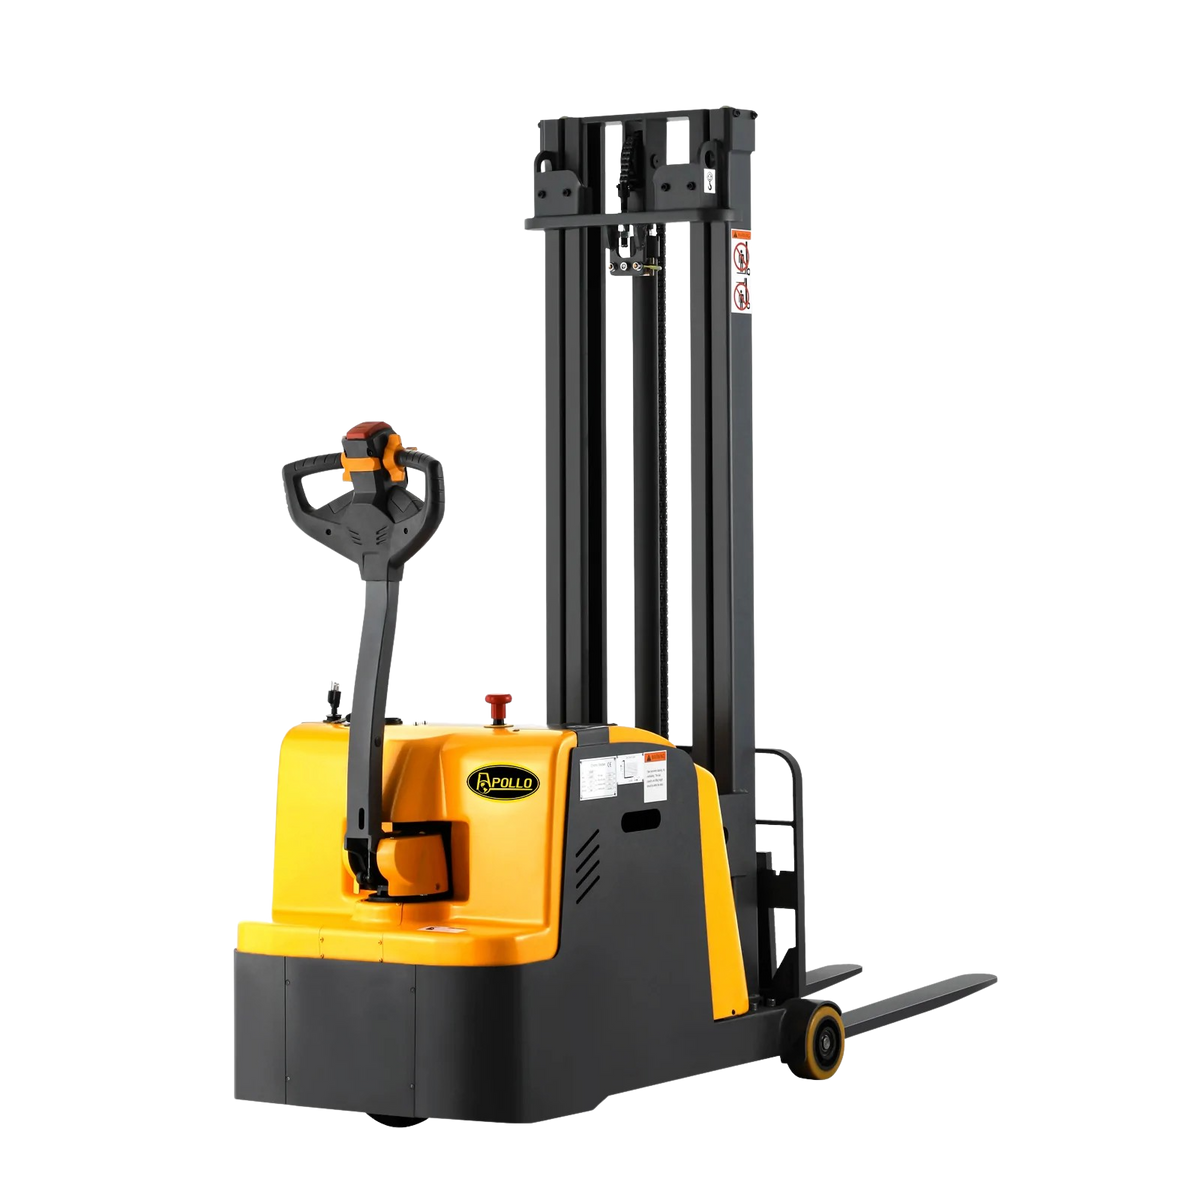 Apollolift A-3040 Counterbalanced Electric Stacker 118" Lifting Height 2200 lbs. Capacity New